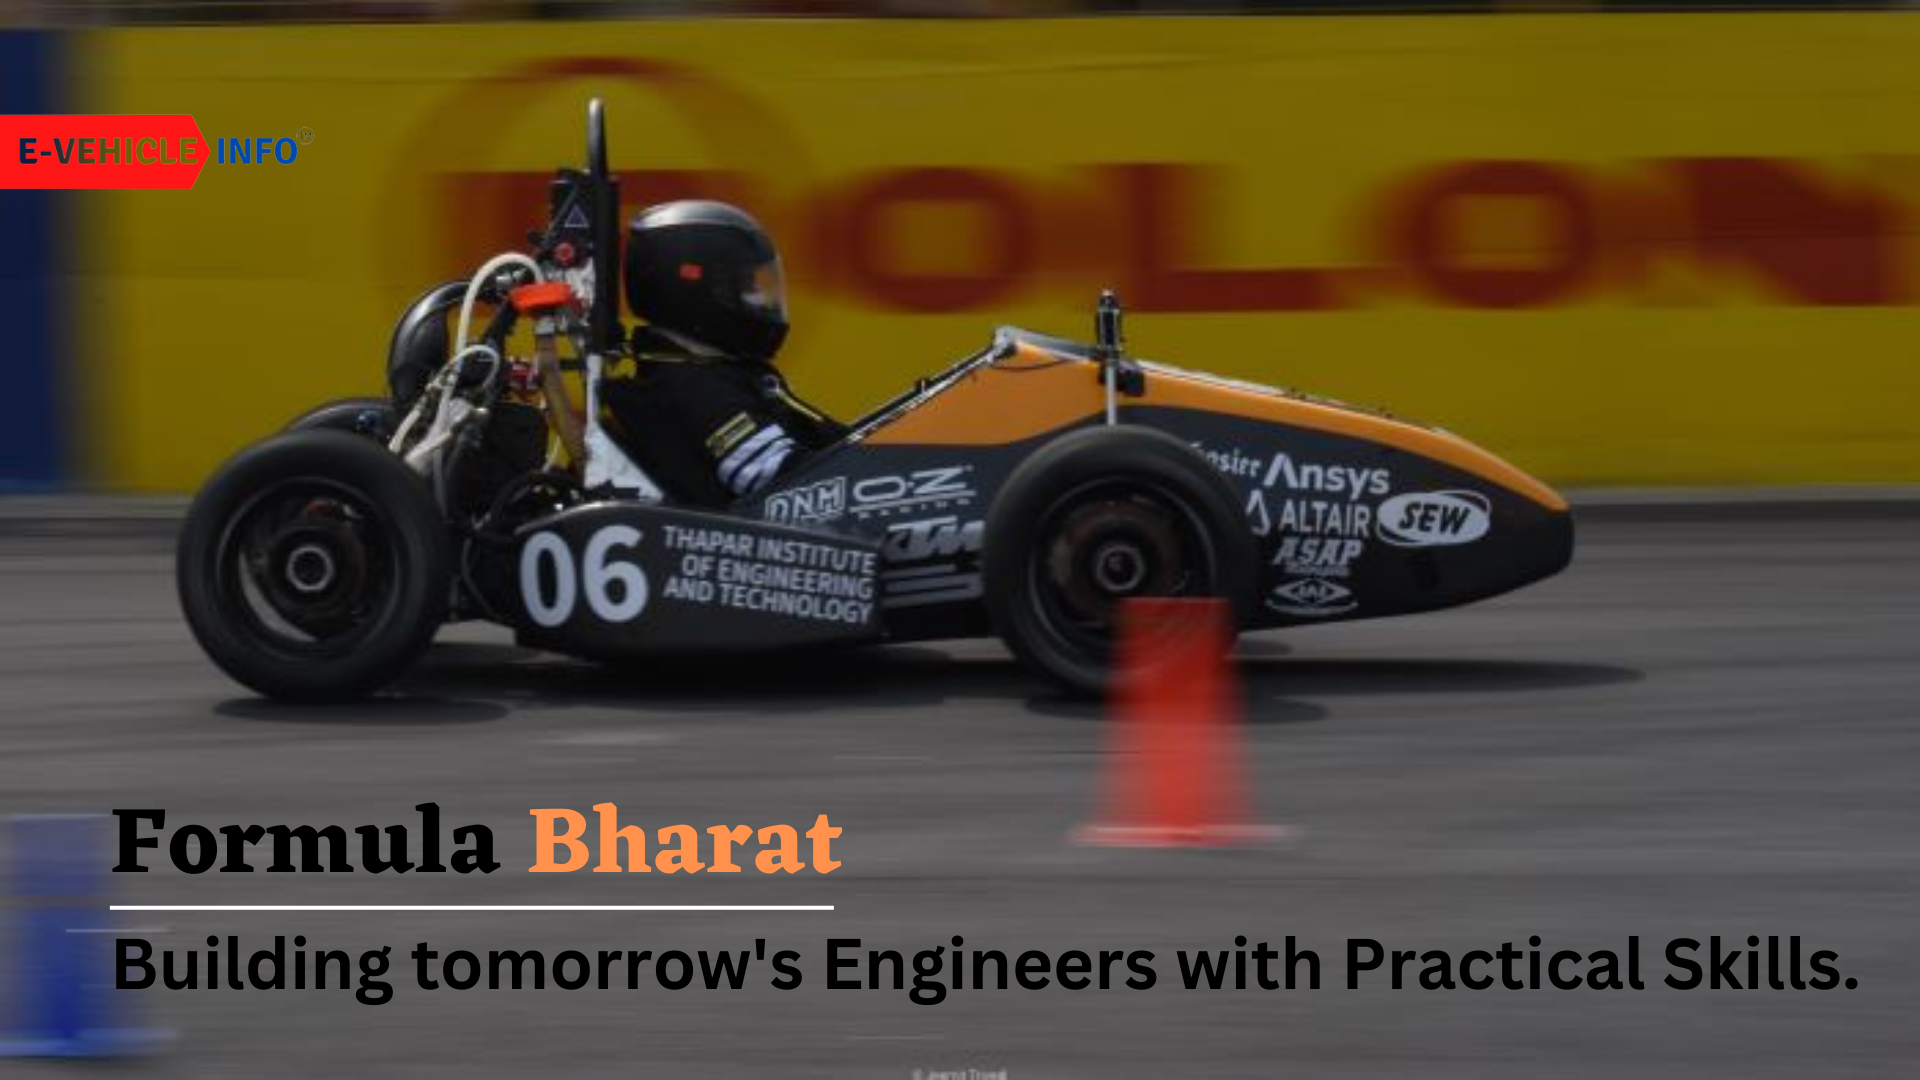 https://e-vehicleinfo.com/formula-bharat-building-tomorrows-engineers-with-practical-skills/